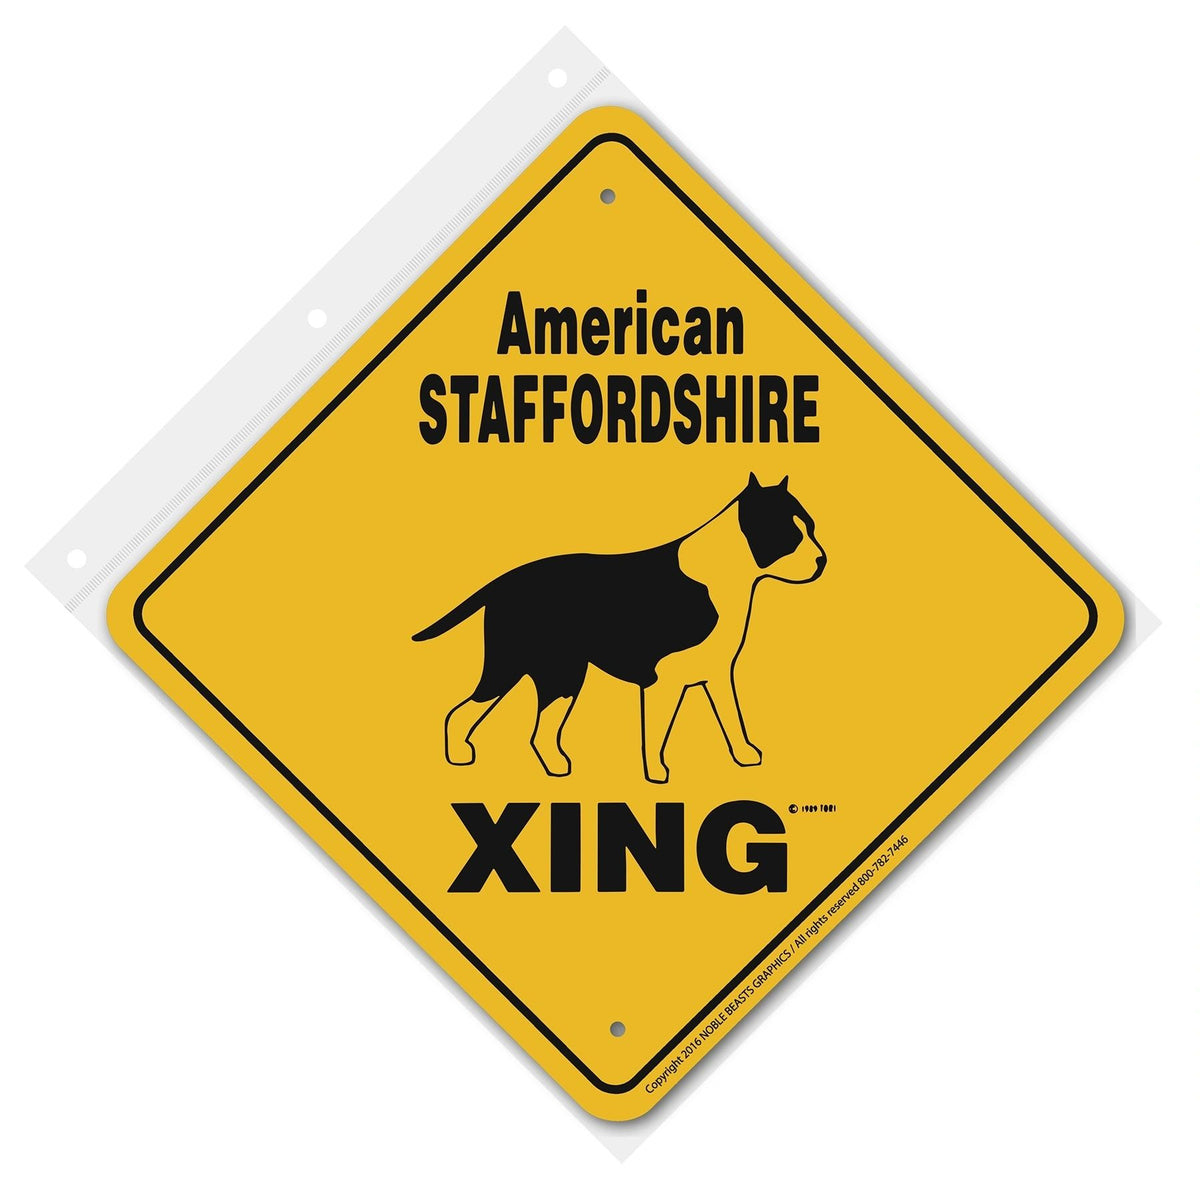 American Staffordshire Xing Sign Aluminum 12 in X 12 in #20740